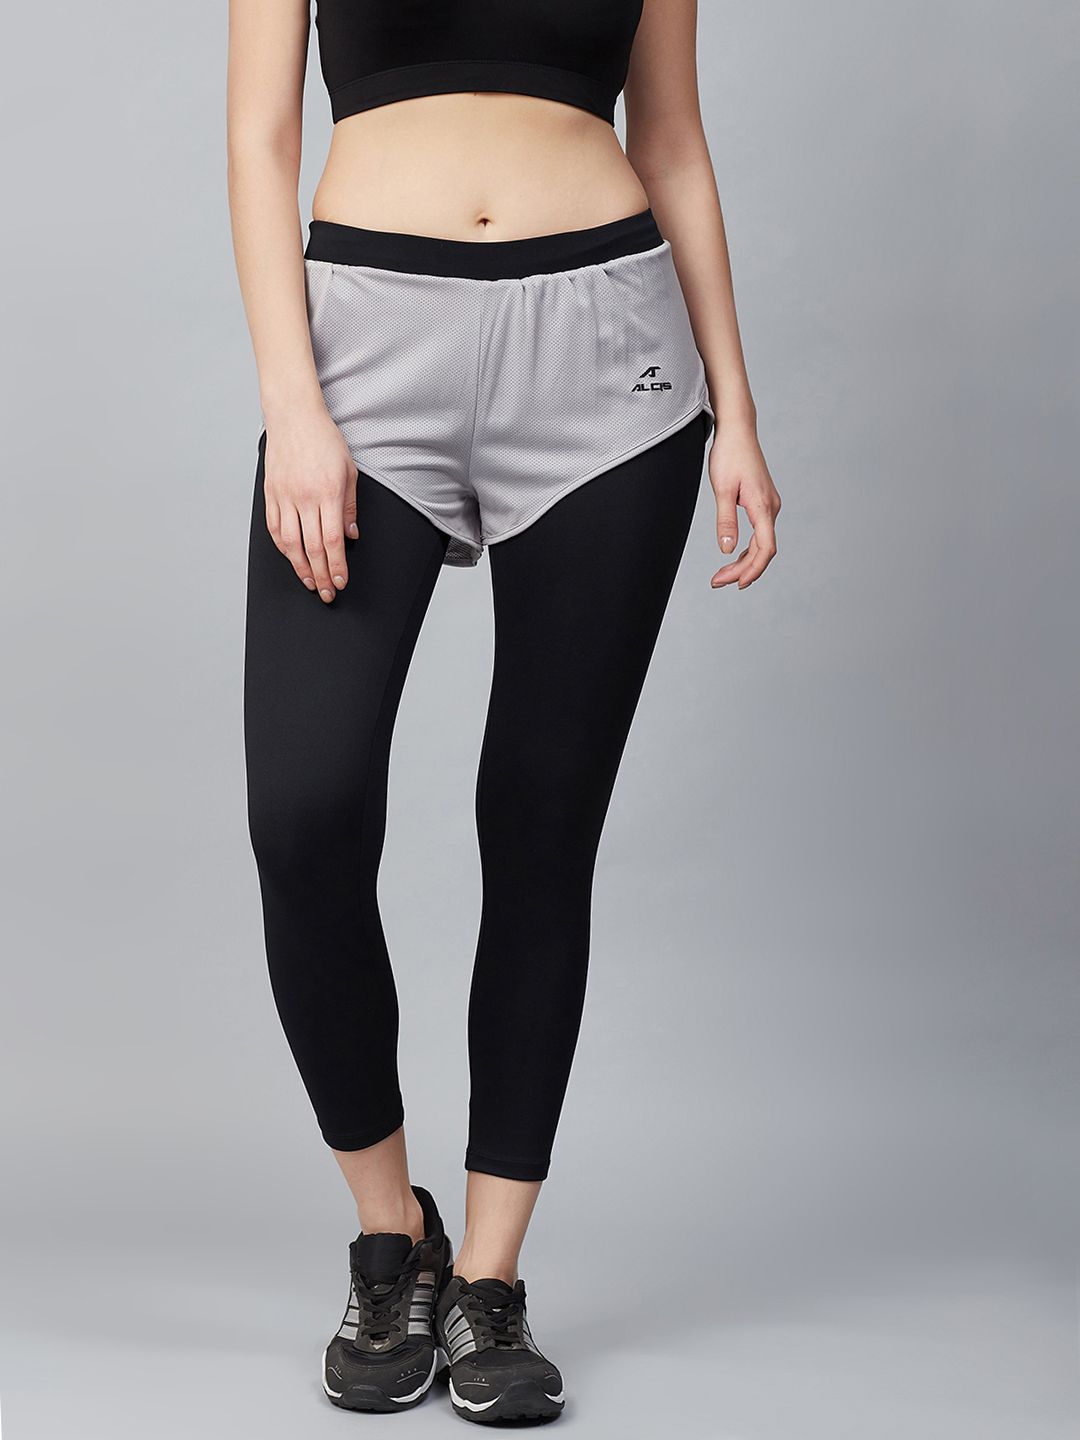 Alcis Women Black & Grey Colourblocked Cropped Running Tights Price in India